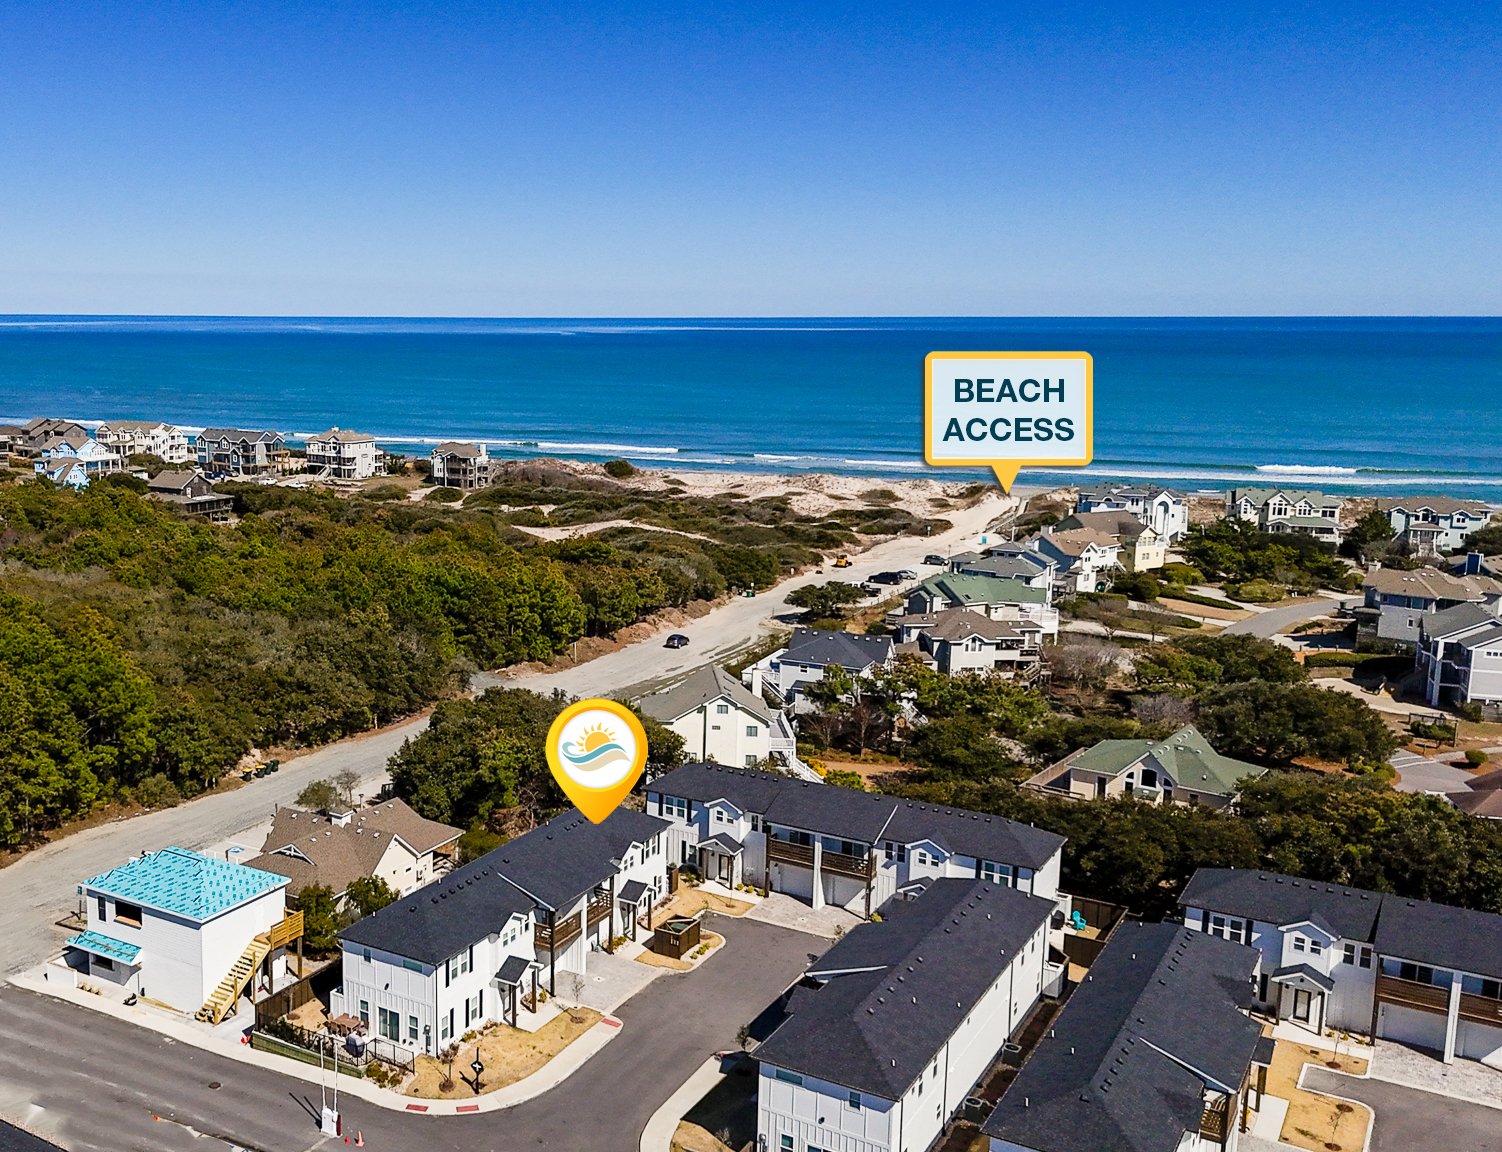 OBX Beach Retreat is just a 1-minute walk to the nearby beach access!